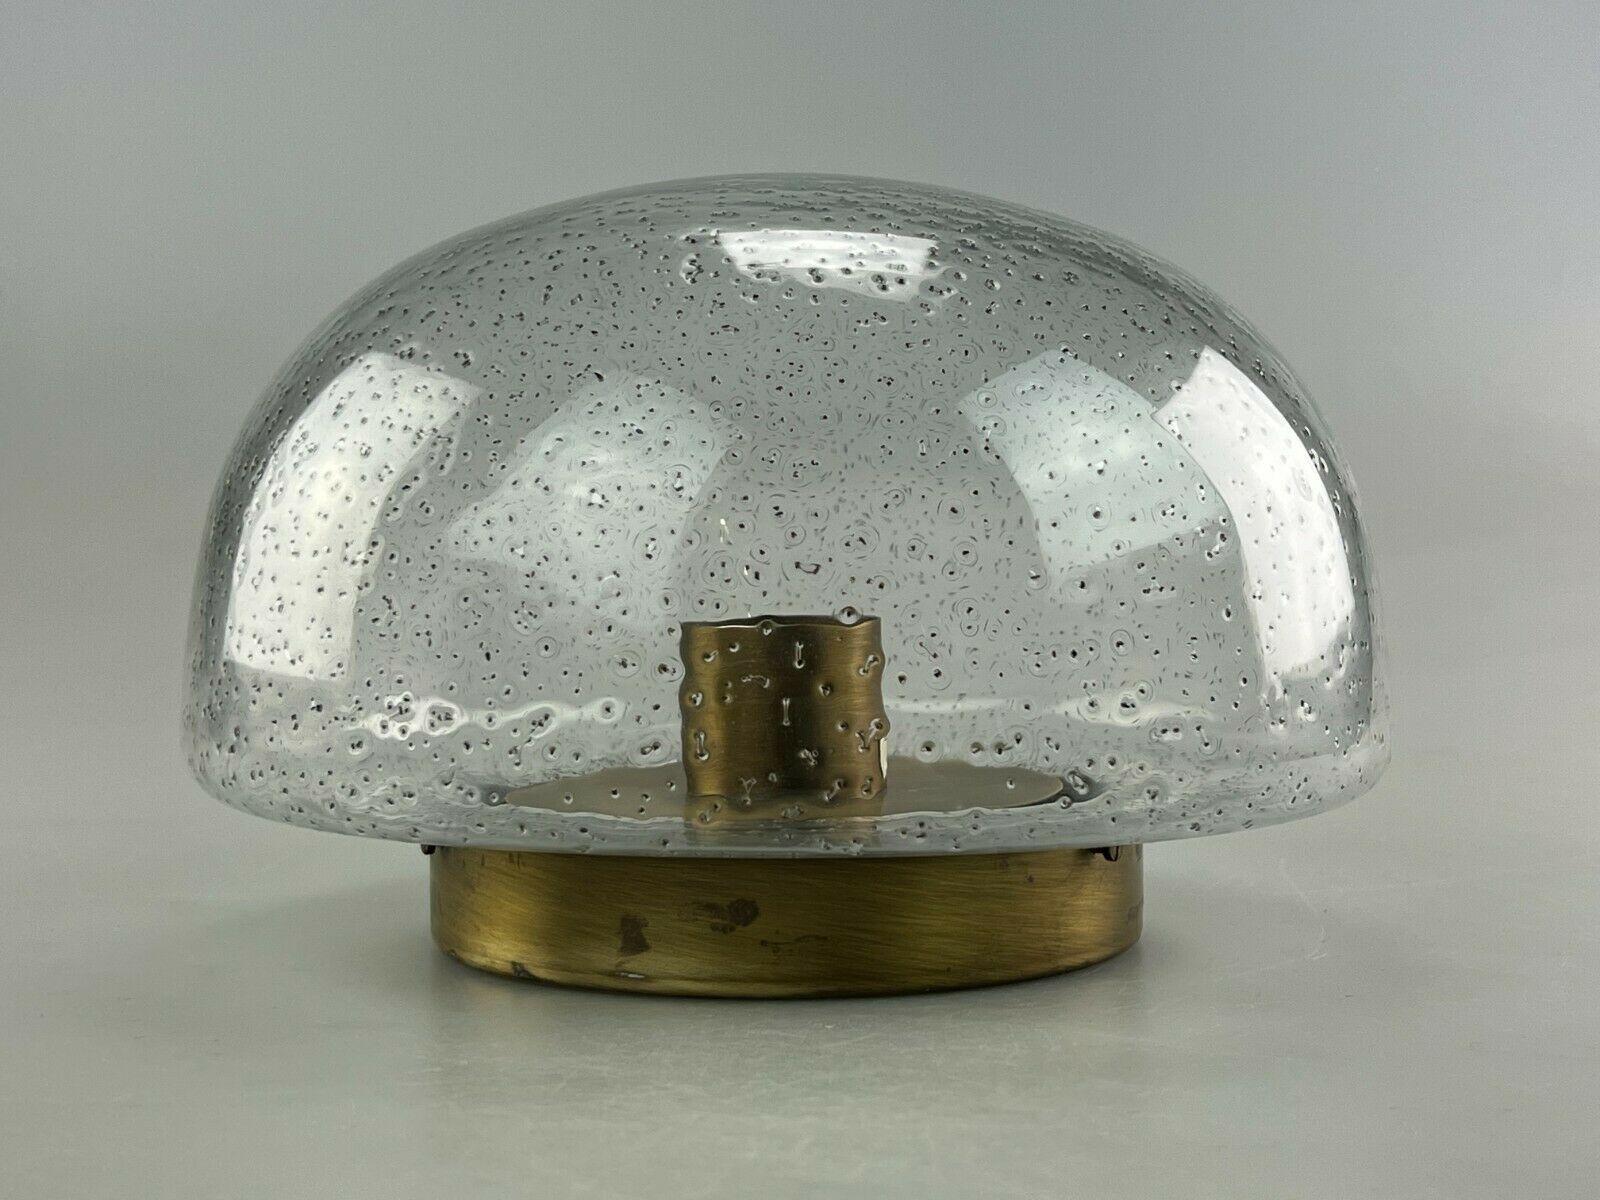 60s 70s lamp light wall lamp wall lamp Hillebrand Space Age design

Object: wall lamp

Manufacturer: Hillebrand

Condition: good

Age: around 1960-1970

Dimensions:

Diameter = 25cm
Height = 16cm

Other notes:

The pictures serve as